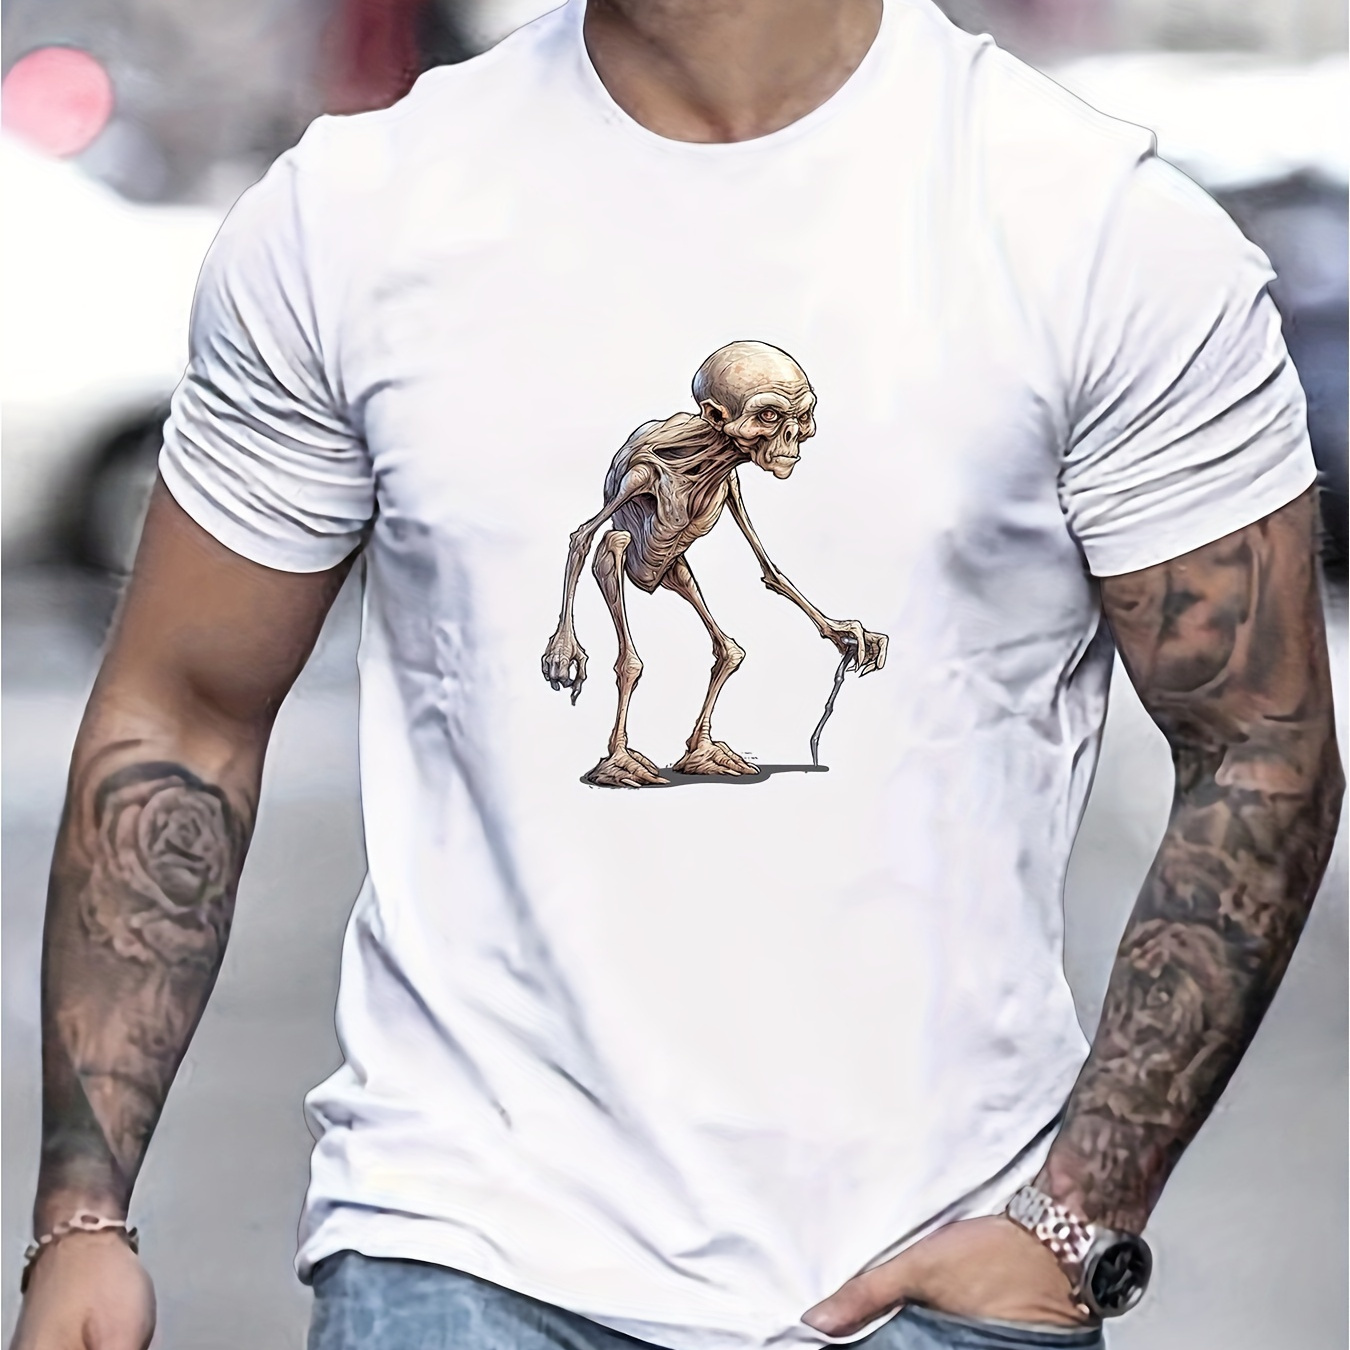 

Alien Creative Print Stylish Cotton T-shirt For Men, Crew Neck Short Sleeve, Casual Tee, Versatile Top For Spring And Summer, Trendy Streetwear Fashion